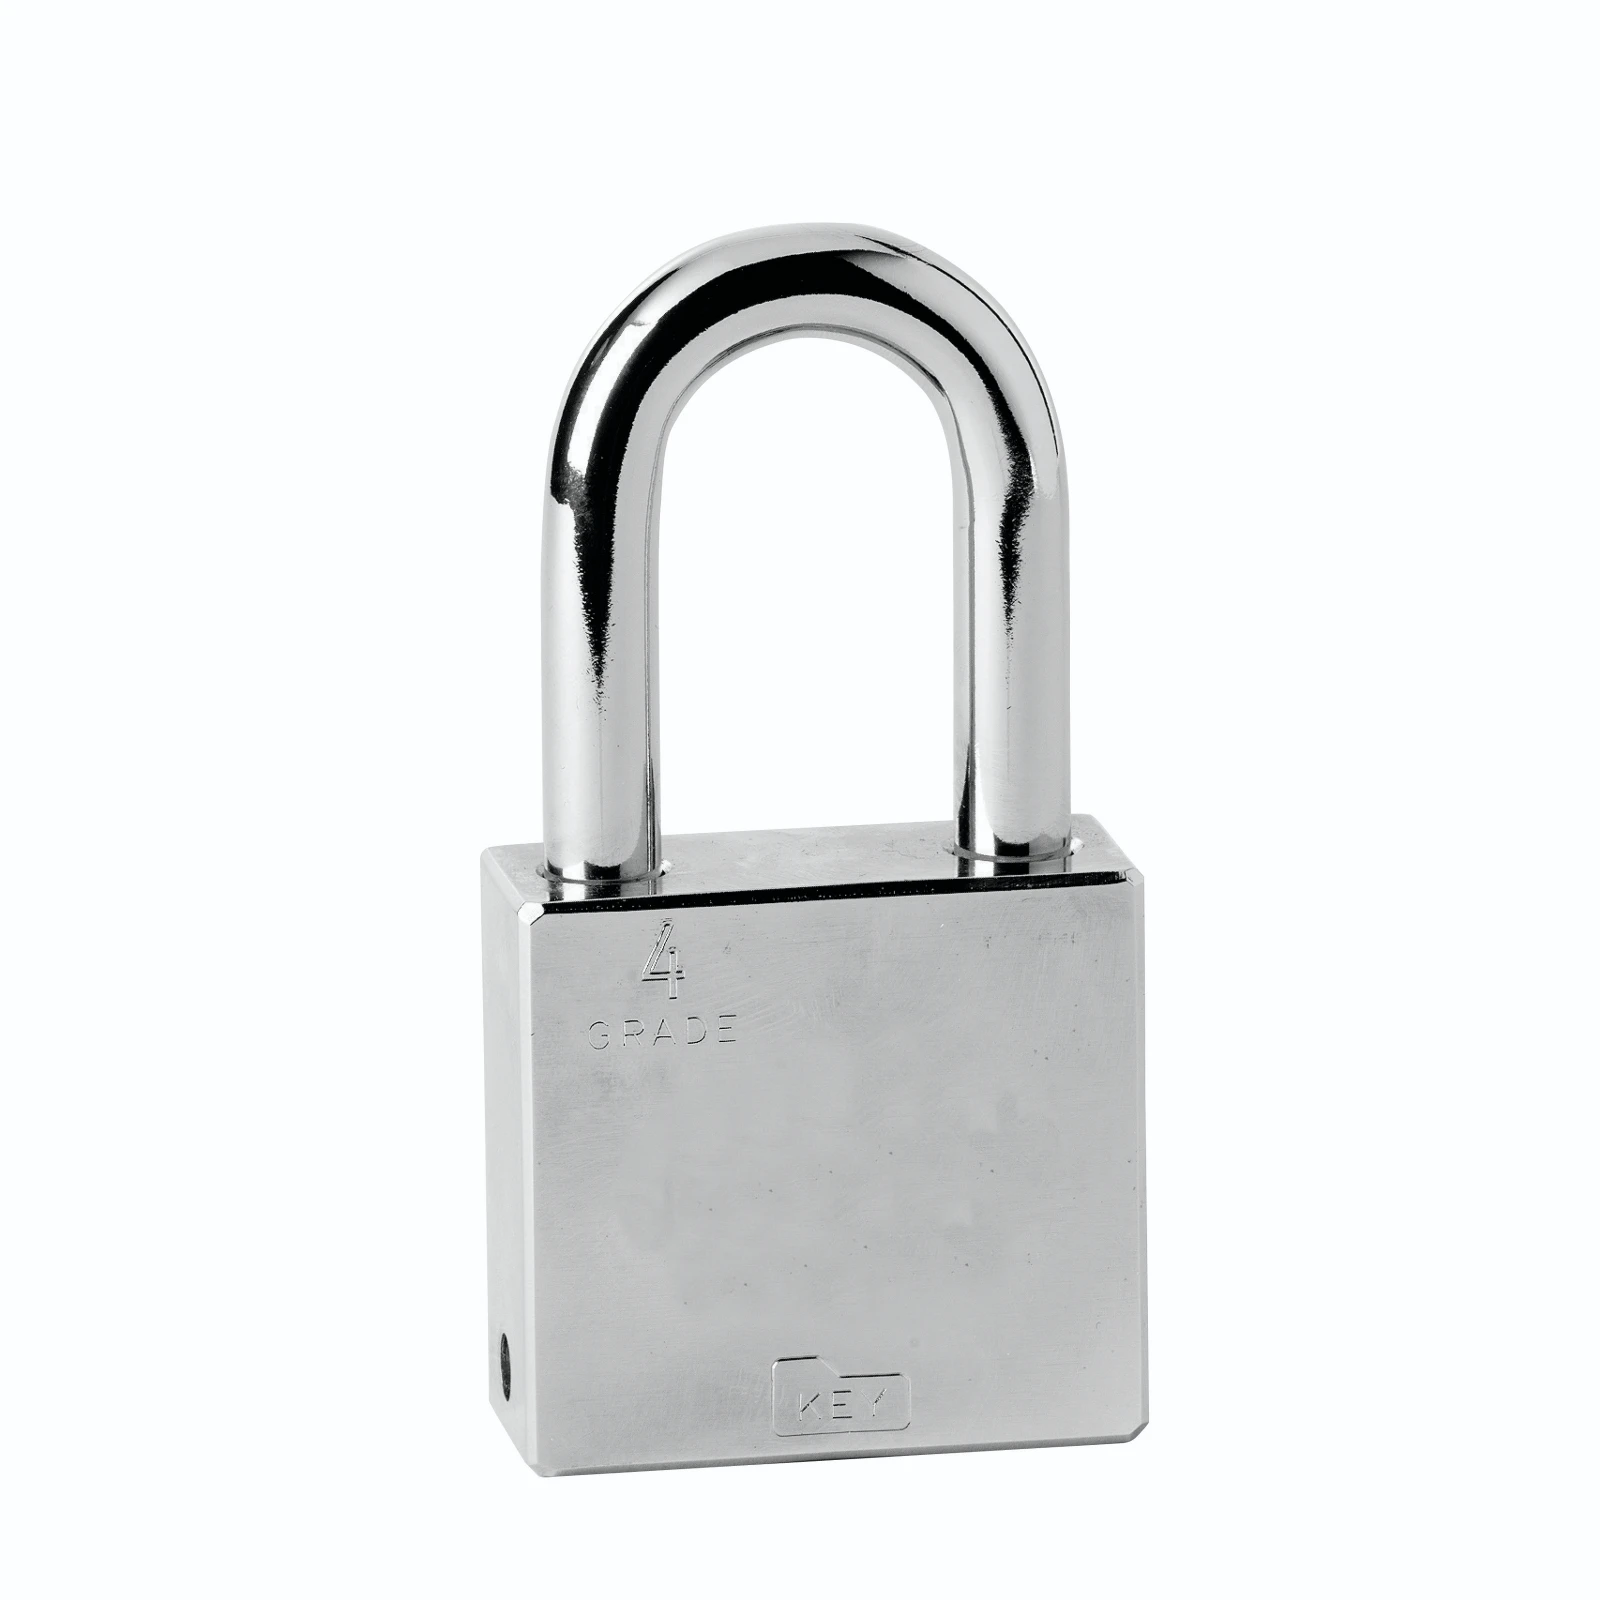 Details about   30mm,40mm,50mm,60mm Heavy Duty Open Shackle High Security Hardened Steel Padlock